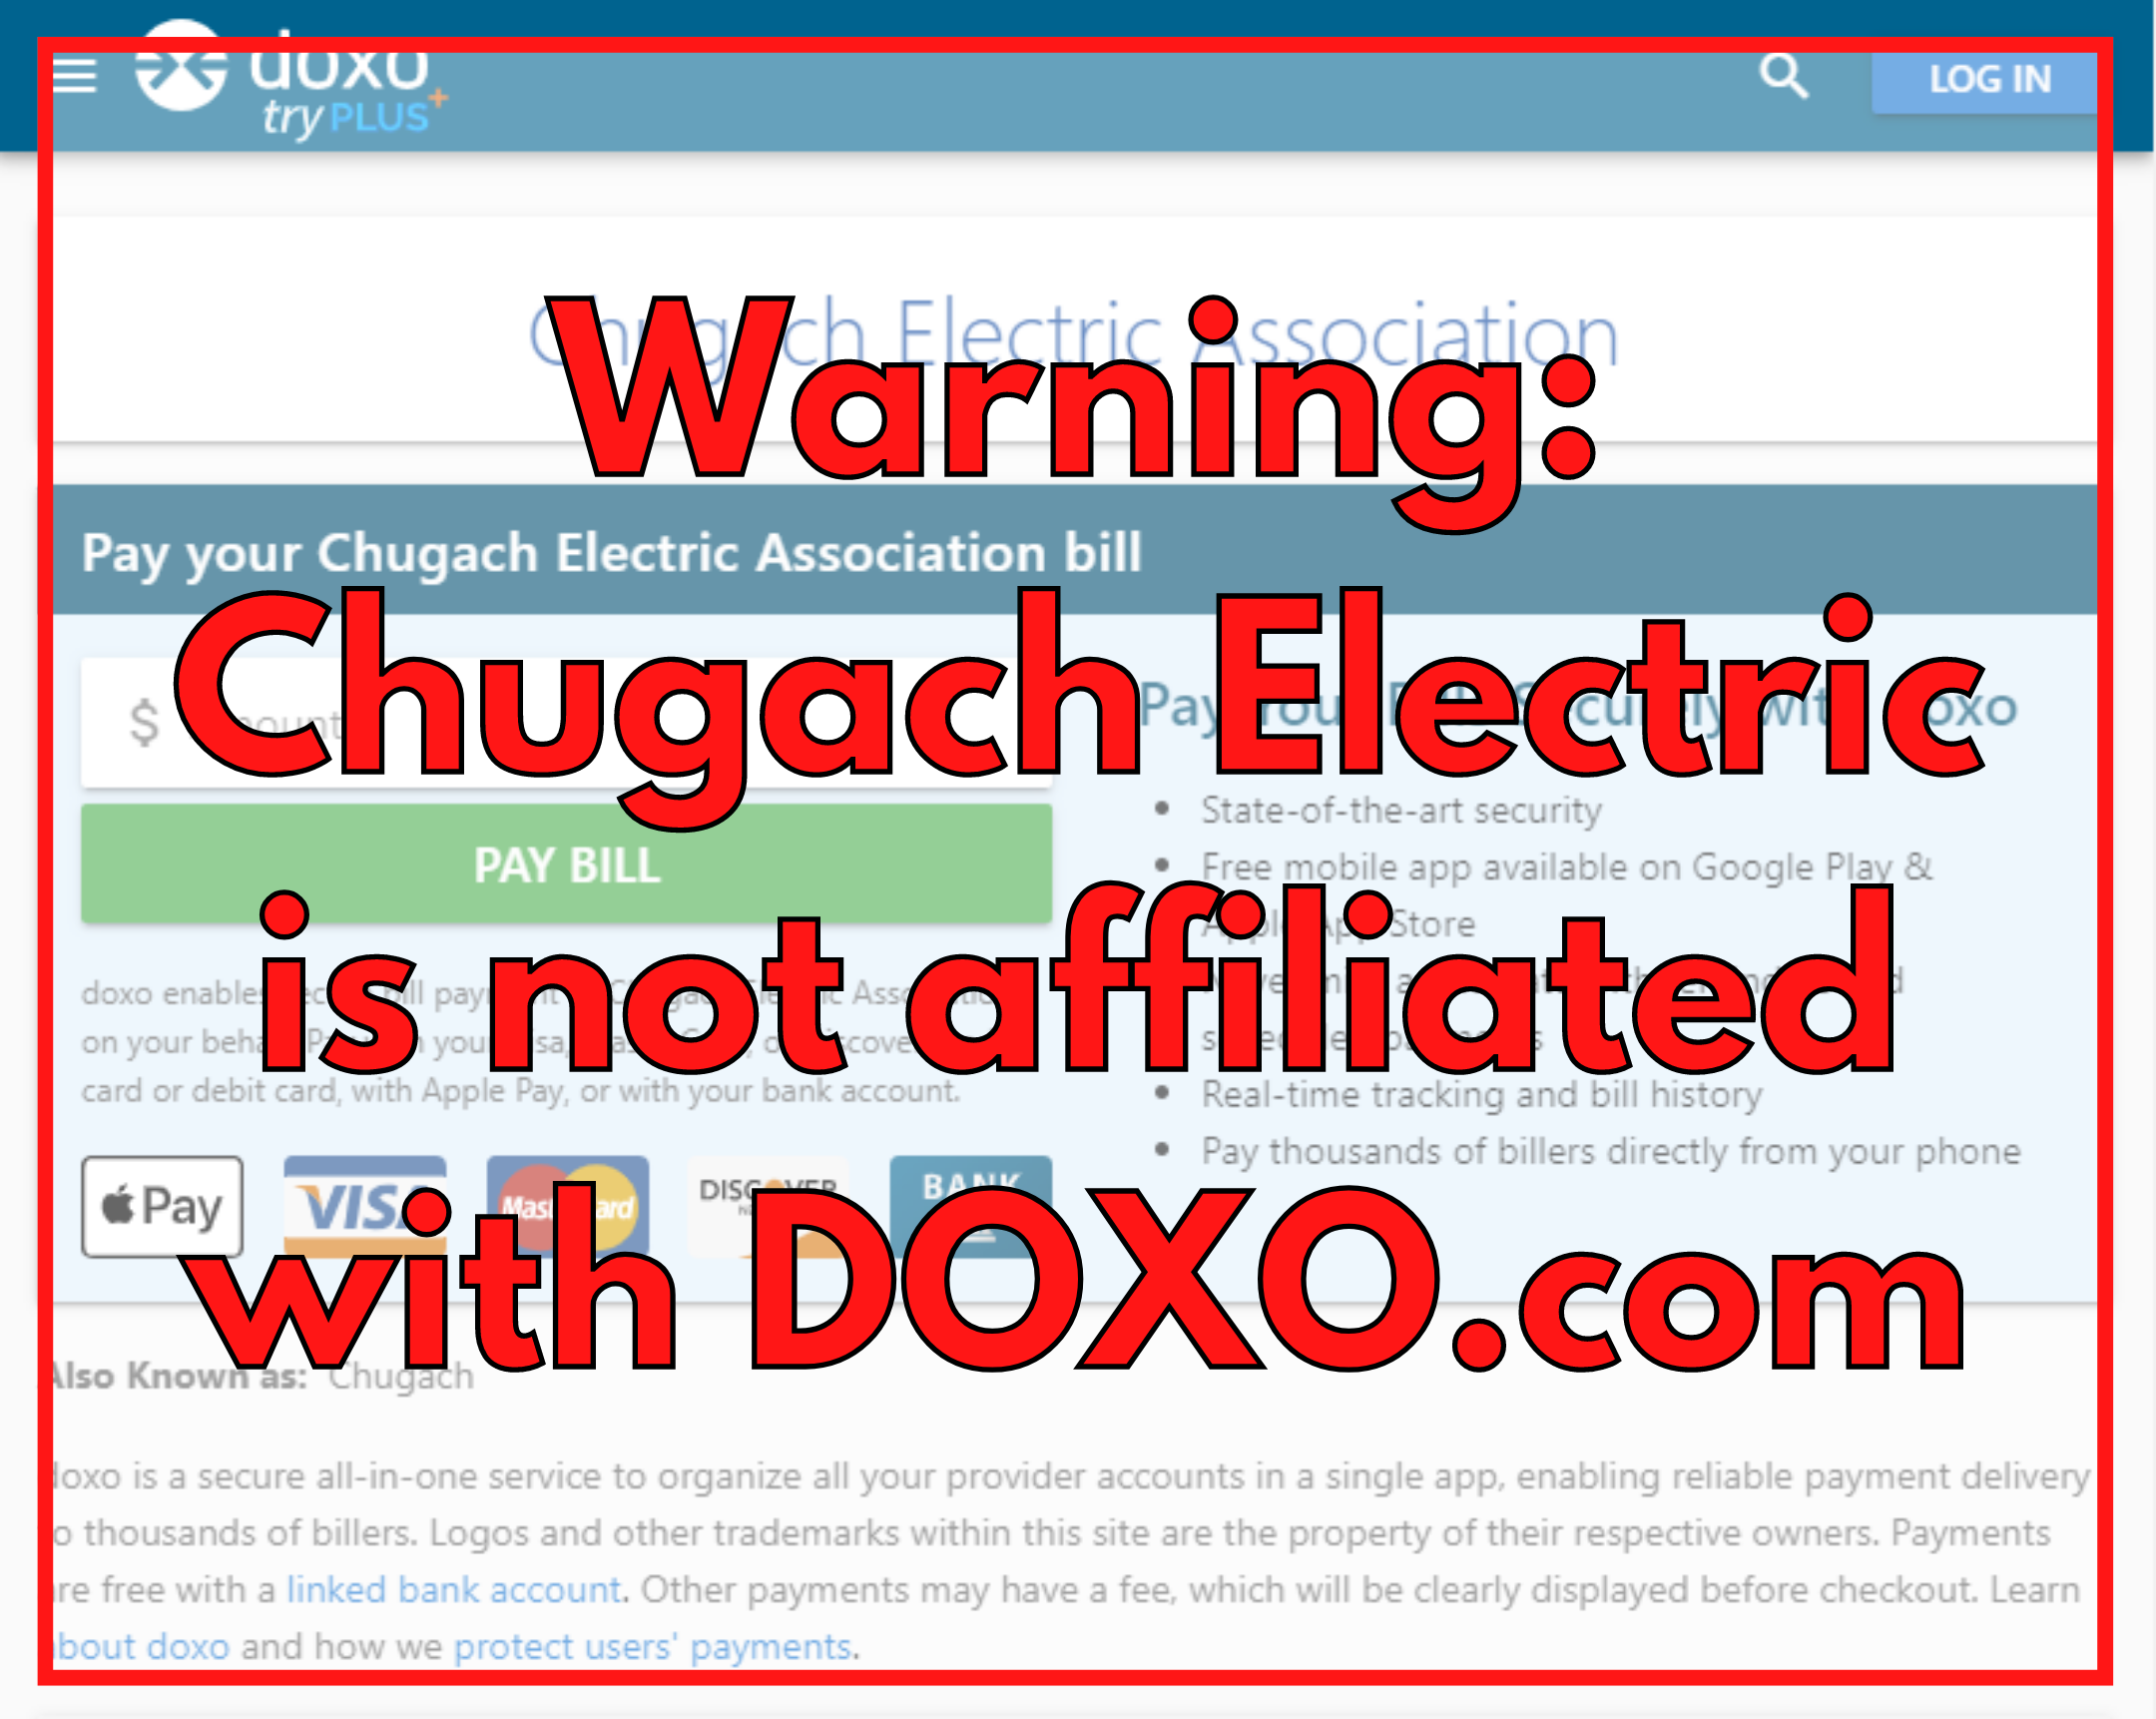 Chugach Electric is not affiliated with Doxo.com